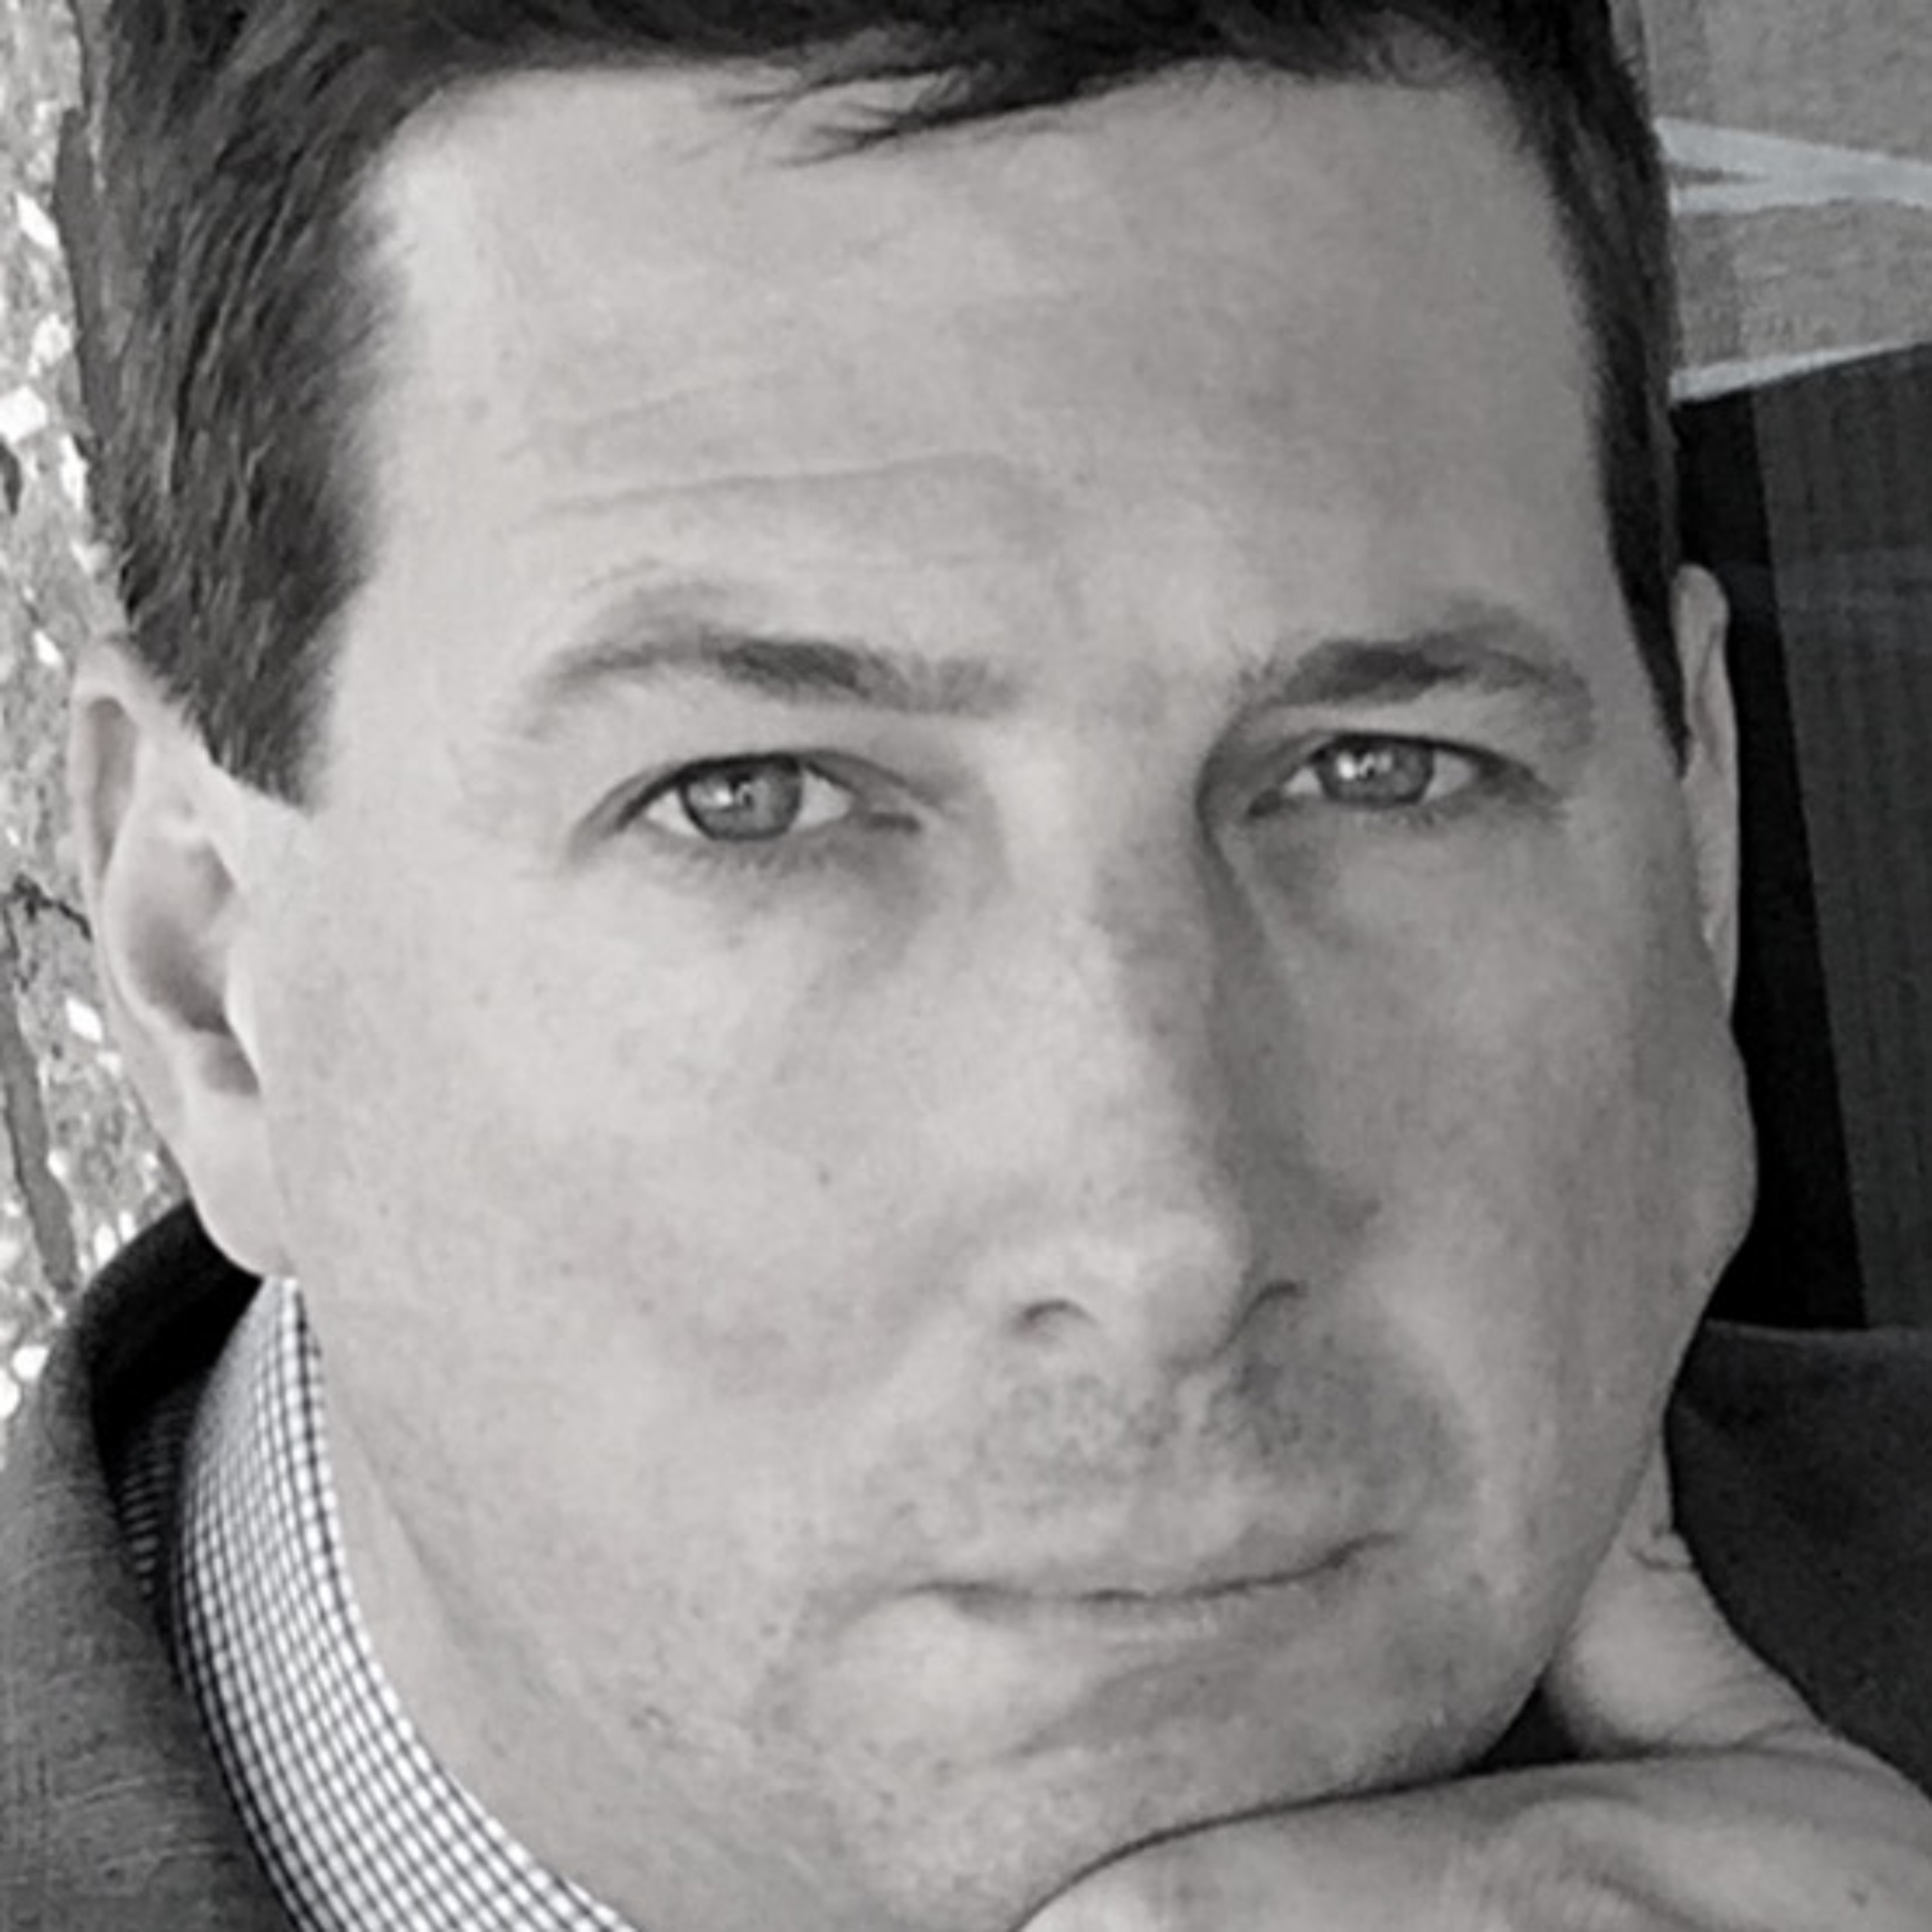 Cyber Safety. Beware Of Romance Scams. Scott Schober, Author, 